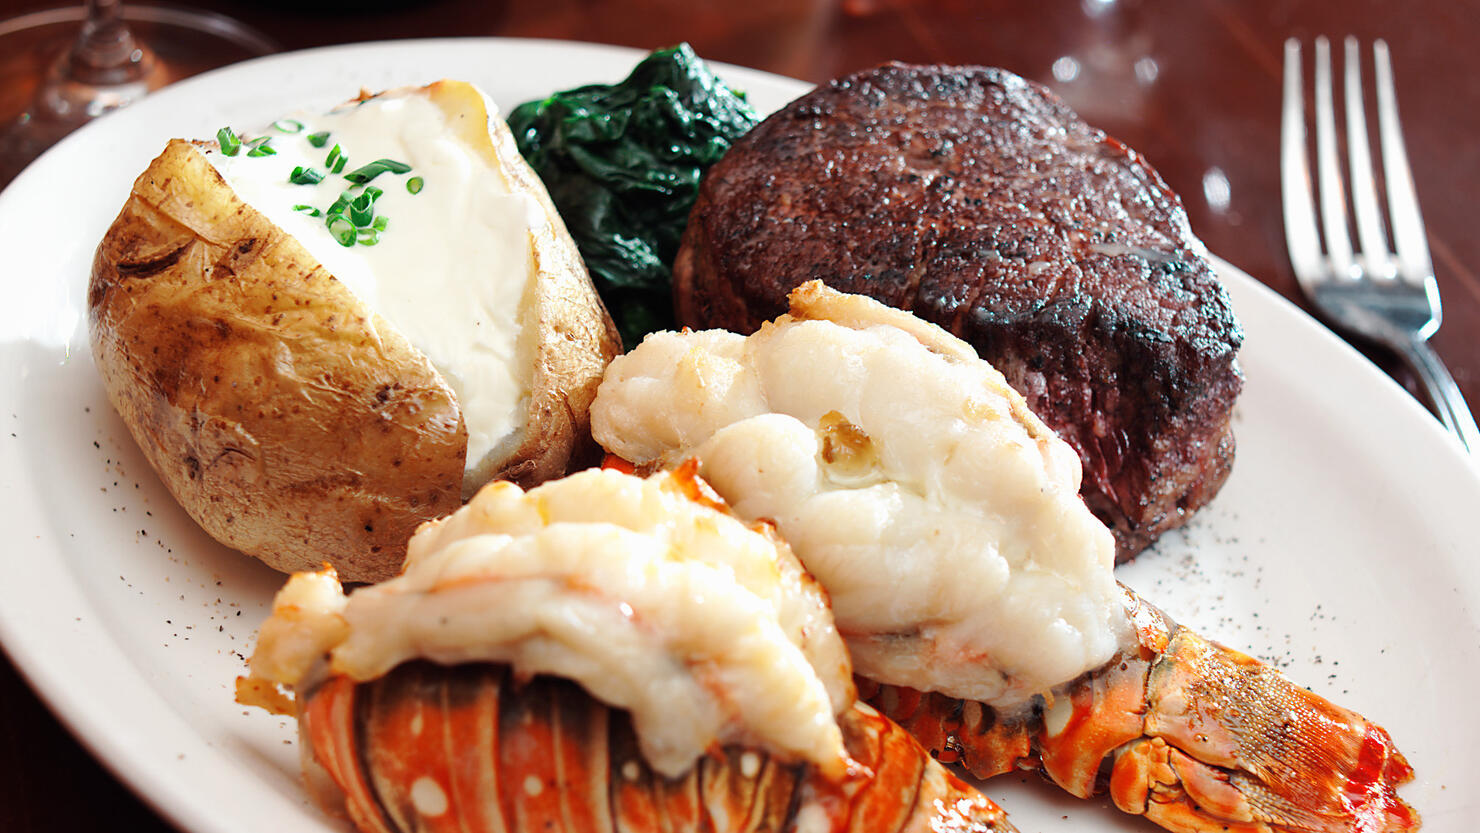 A sumptuous meal of surf and turf with lobster